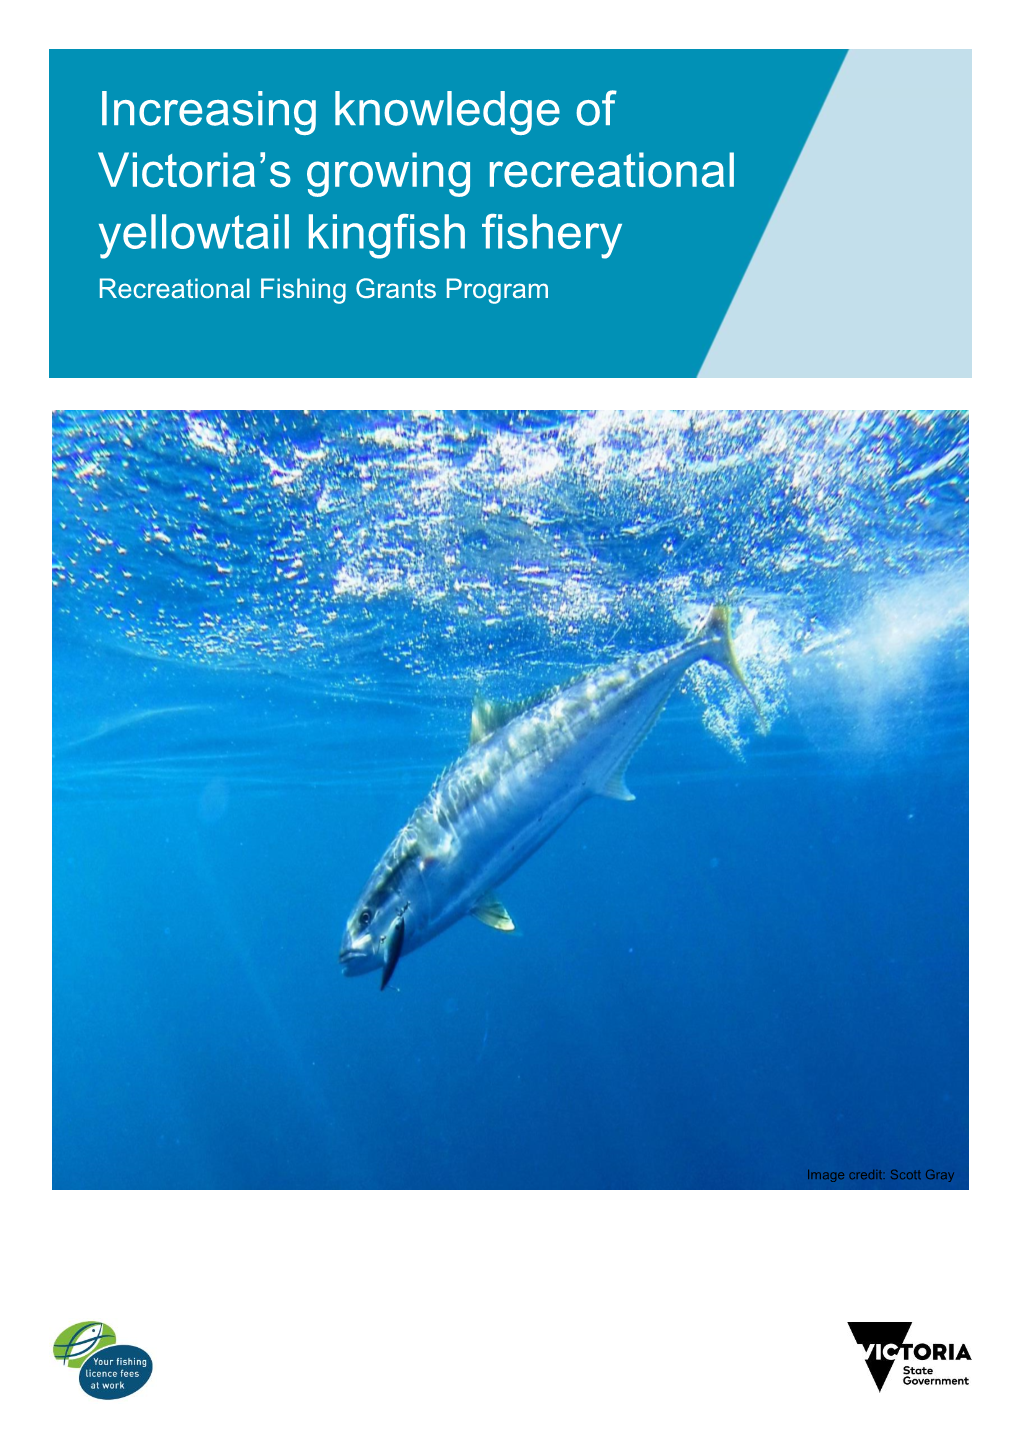 Increasing Knowledge of Victoria's Growing Recreational Yellowtail